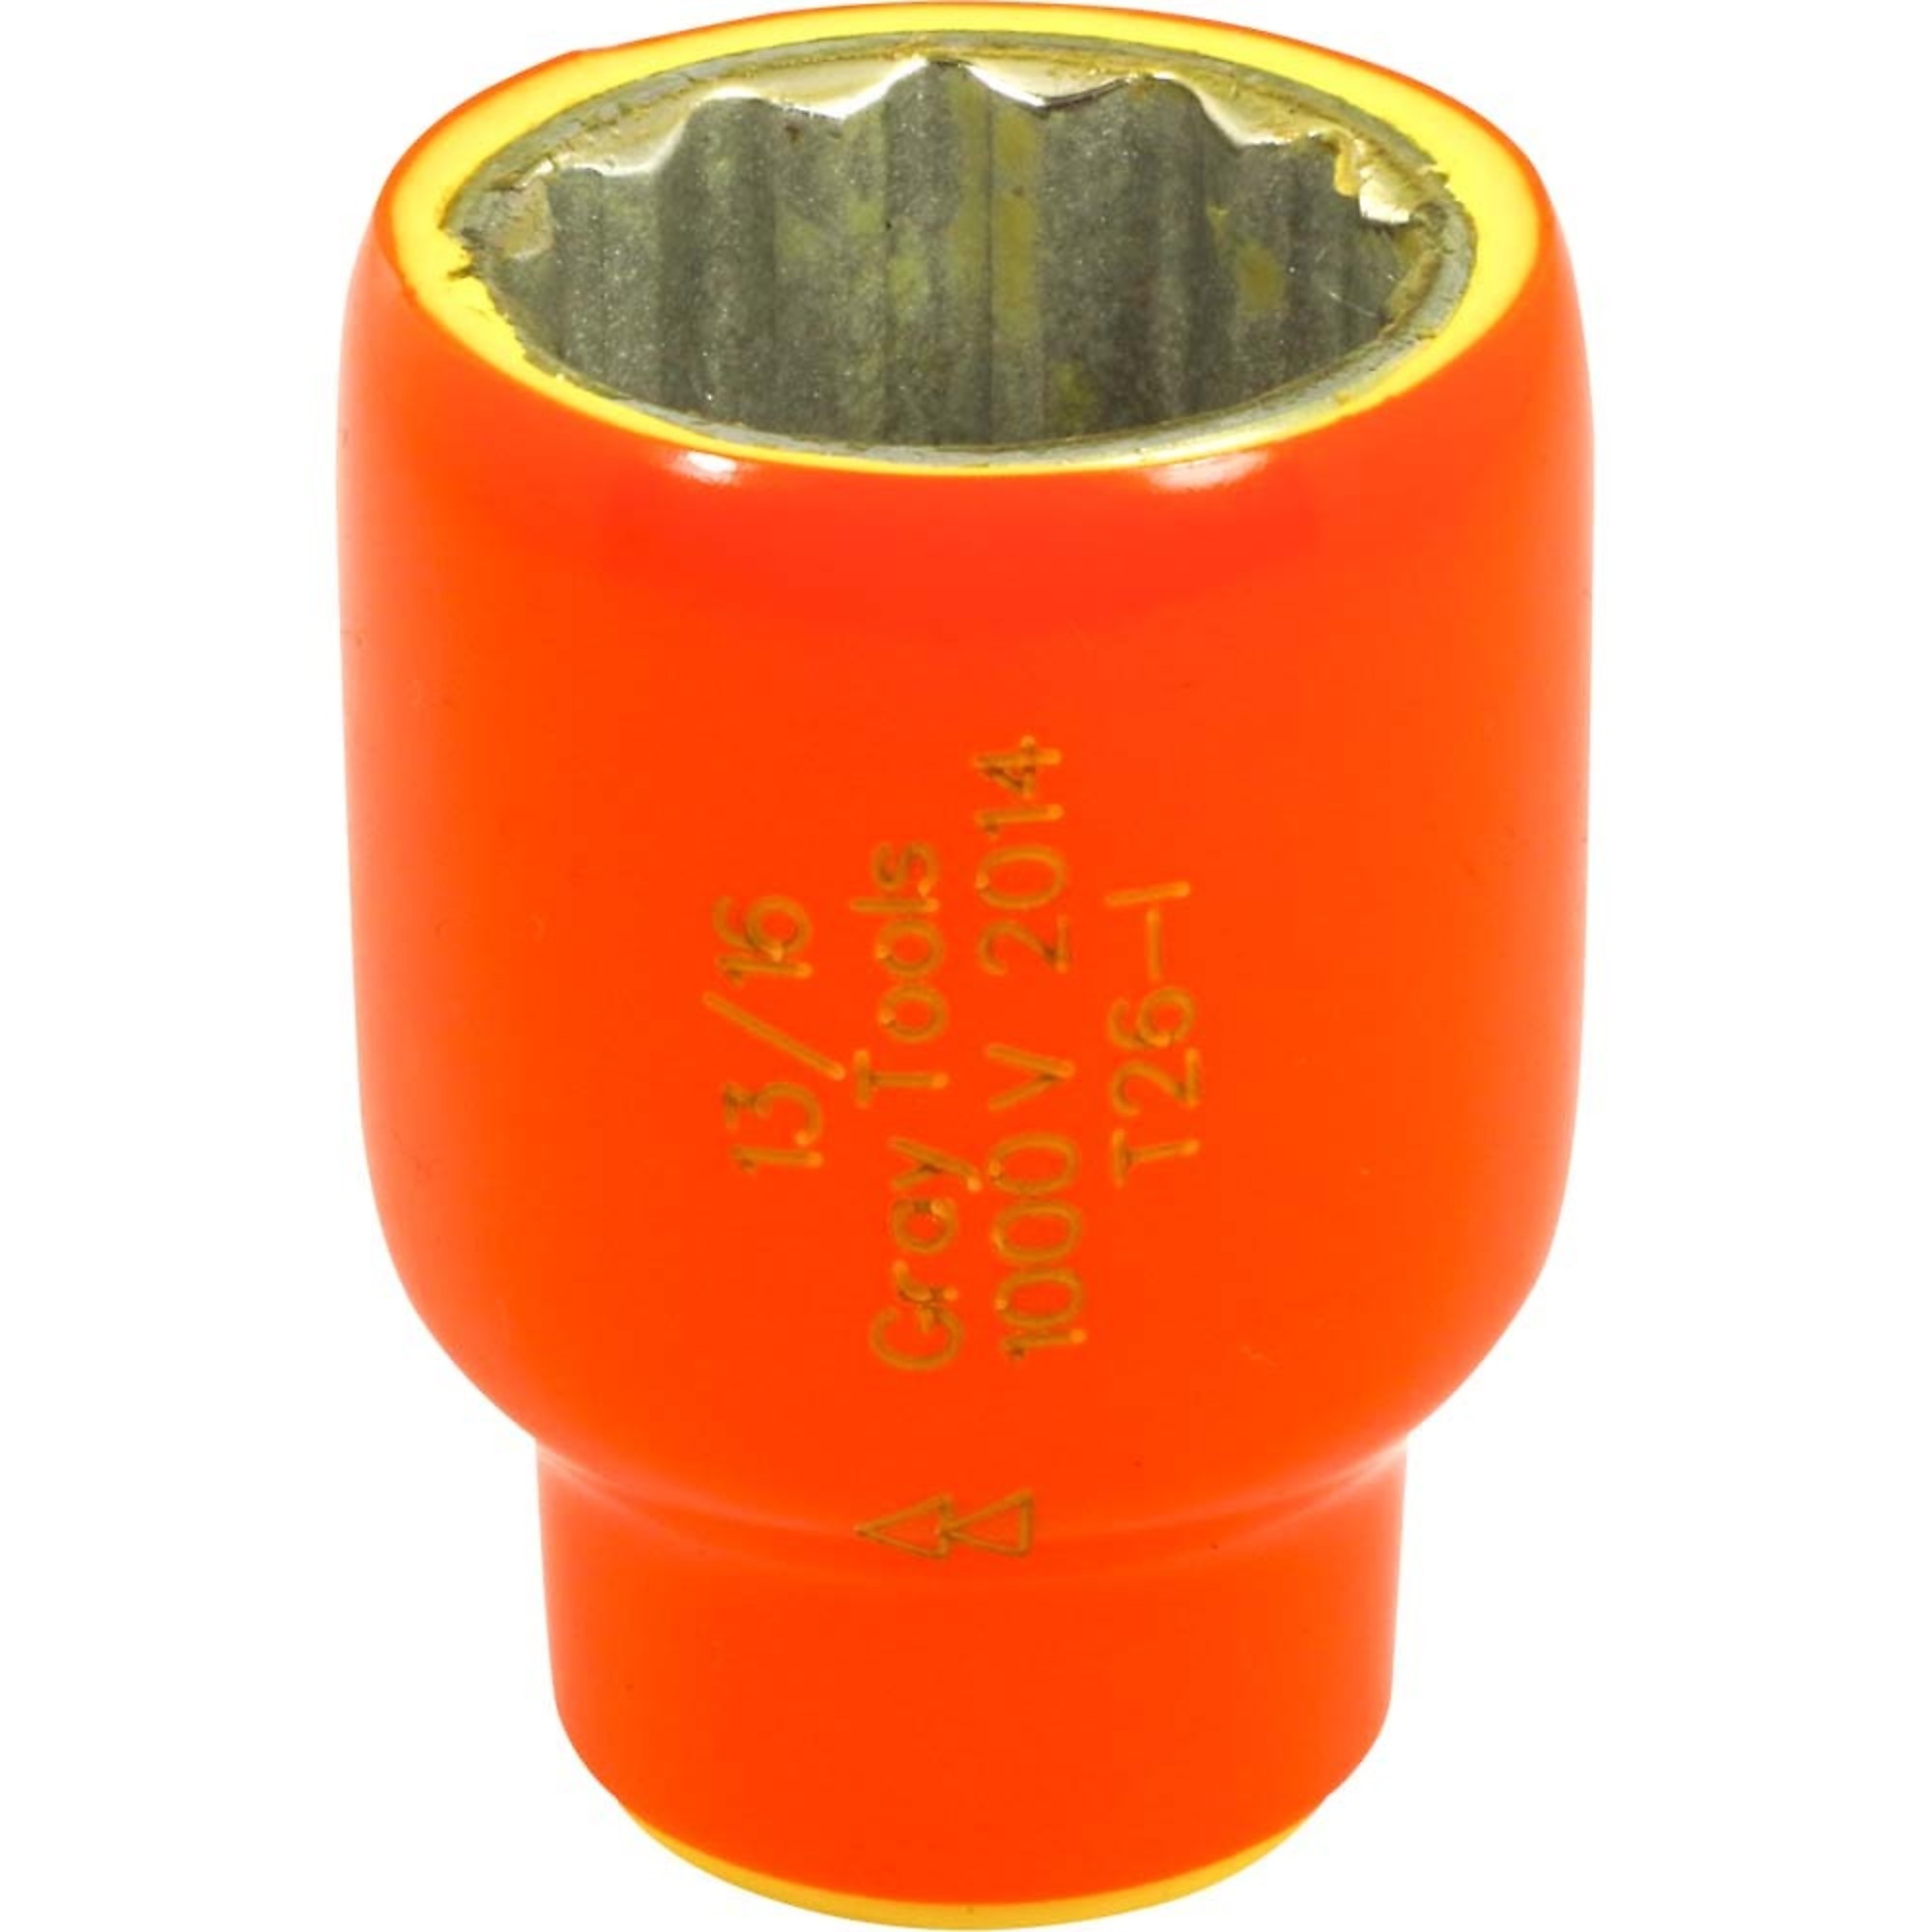 Gray Tools, 13/16Inch X 3/8Inch Drive Socket 1000V Insulated, Socket Size 13/16 in, Drive Size 3/8 in, Model T26-I